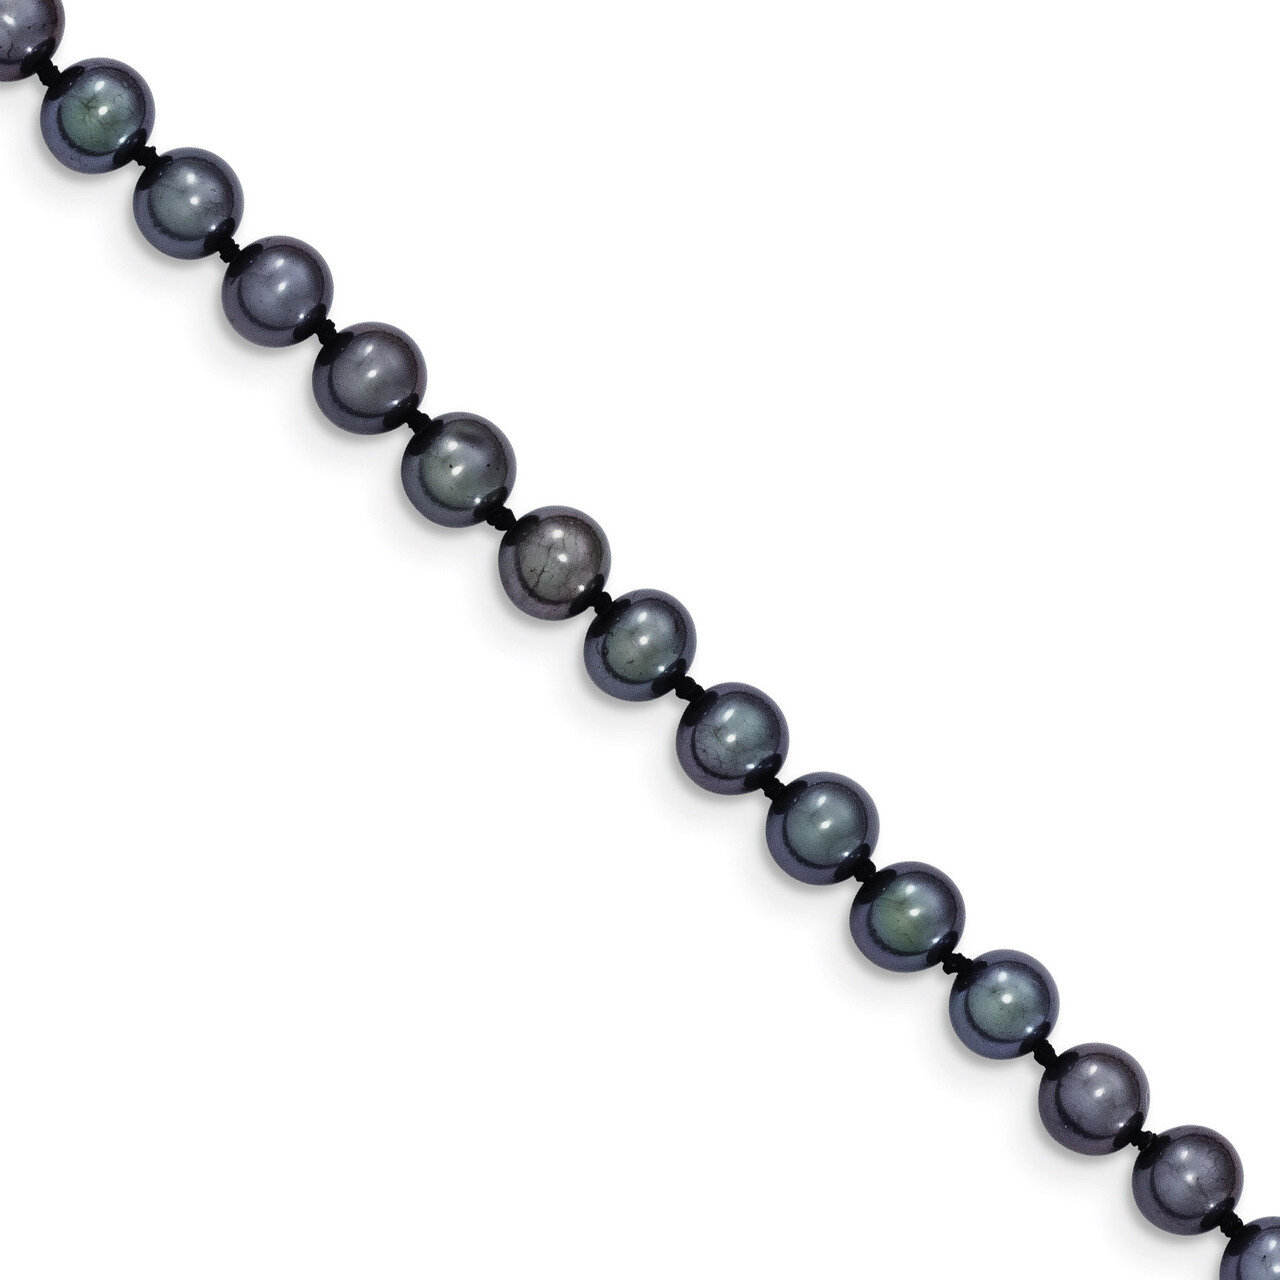 5-6mm Black Cultured Near Round Pearl Necklace 18 Inch 14k Gold BPN050-18